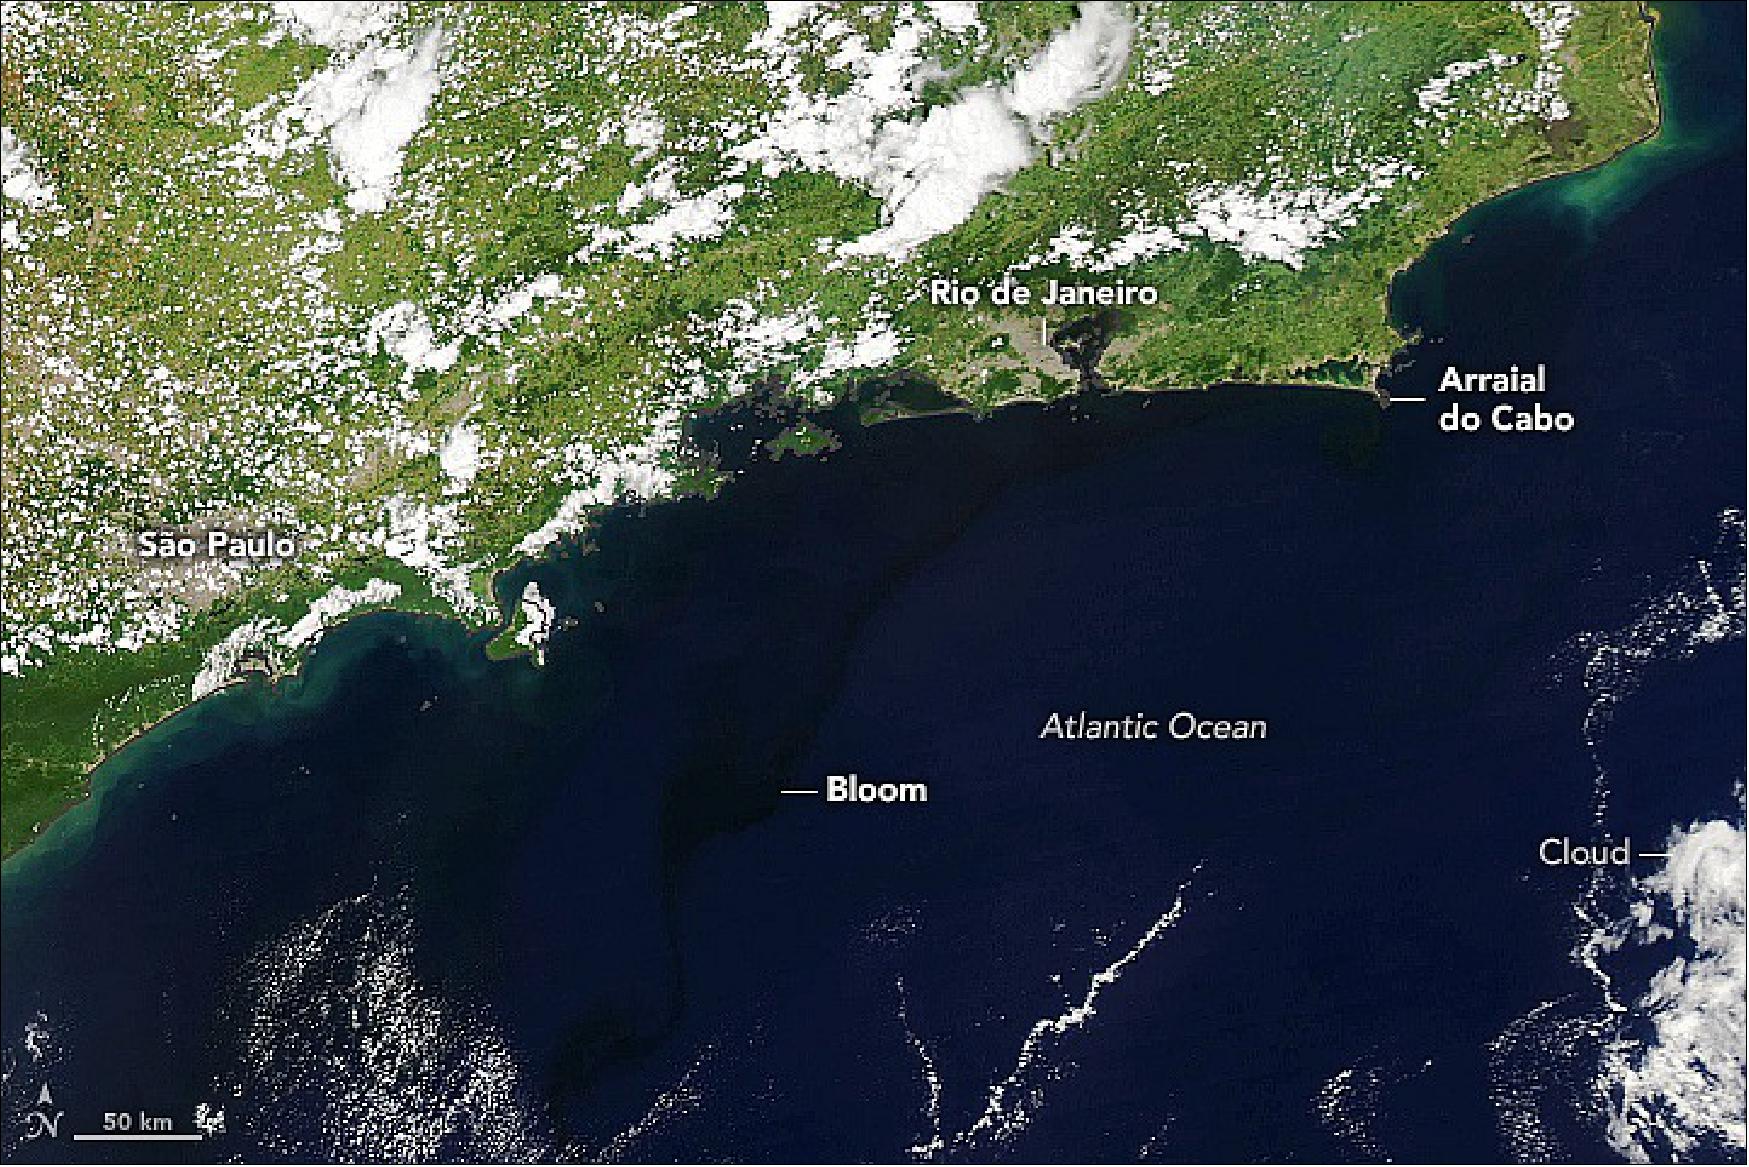 Figure 46: A dark, rainy spring gave way to a vast, long-lived phytoplankton bloom off the coast of Brazil. By late December, the bloom was fading but remained visible to the Moderate Resolution Imaging Spectroradiometer (MODIS) on NASA’s Aqua satellite, which acquired these images on December 26, 2021. The bloom shows up in the natural-color image (Figure 46) as a faint, dark swirl of water extending away from the coast. An even fainter patch is visible to the left of the swirl. The bloom is more distinct in the false-color image (Figure 47). In this view, shades of green depict concentrations of chlorophyll-a, the primary pigment used by phytoplankton to capture sunlight. The darkest shades of green show areas with the greatest chlorophyll concentrations (image credit: NASA Earth Observatory images by Lauren Dauphin, using MODIS data from NASA EOSDIS LANCE and GIBS/Worldview. Story by Kathryn Hansen)